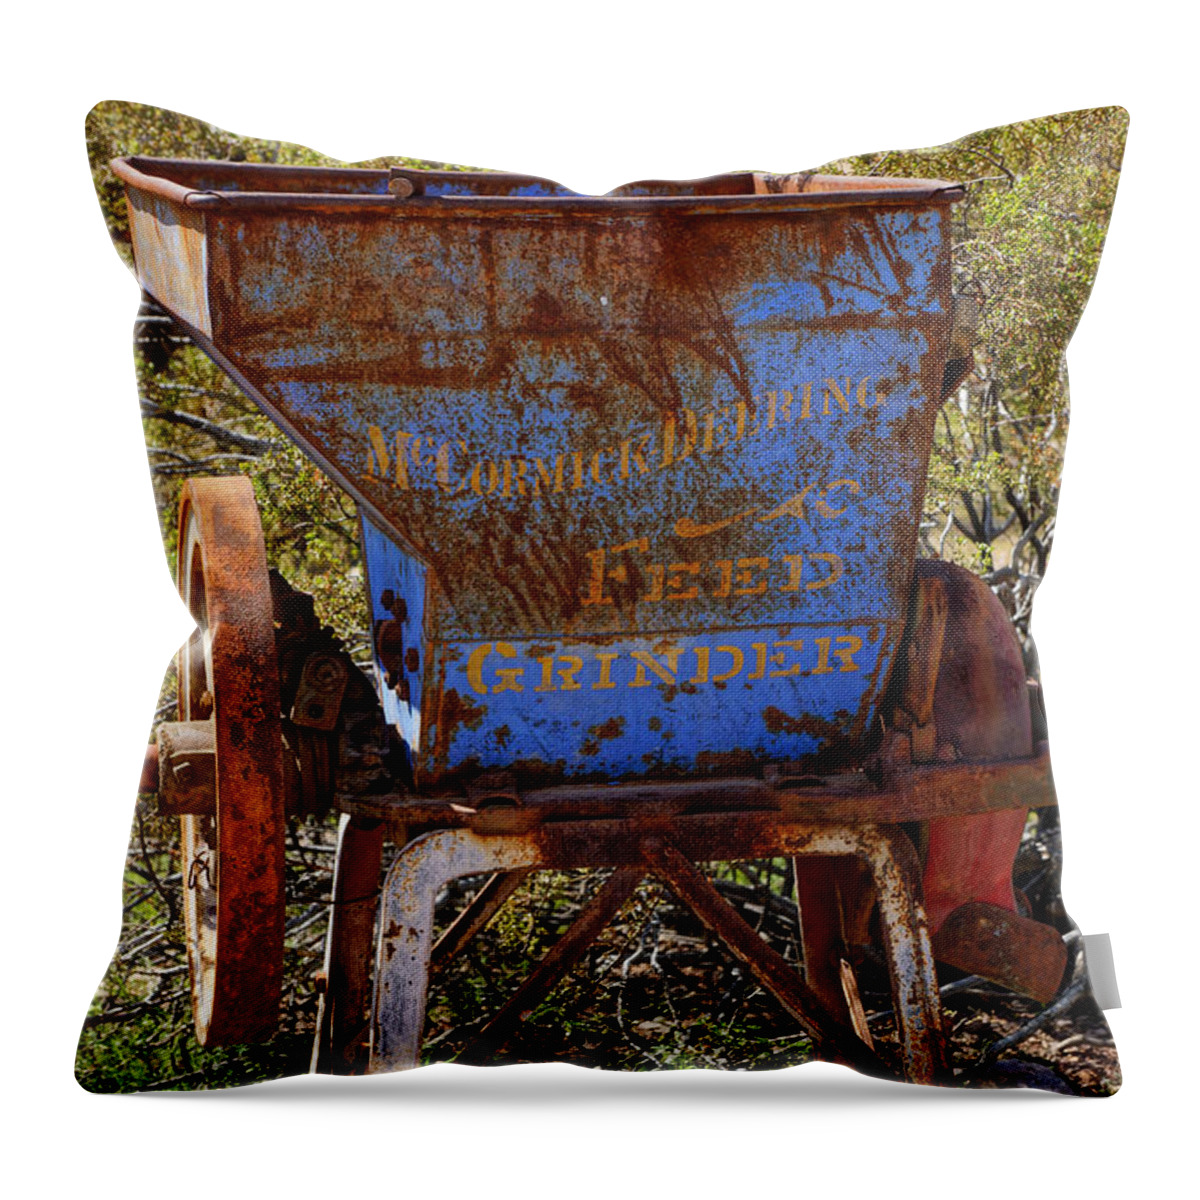  Throw Pillow featuring the photograph Feed Grinder by Rodney Lee Williams